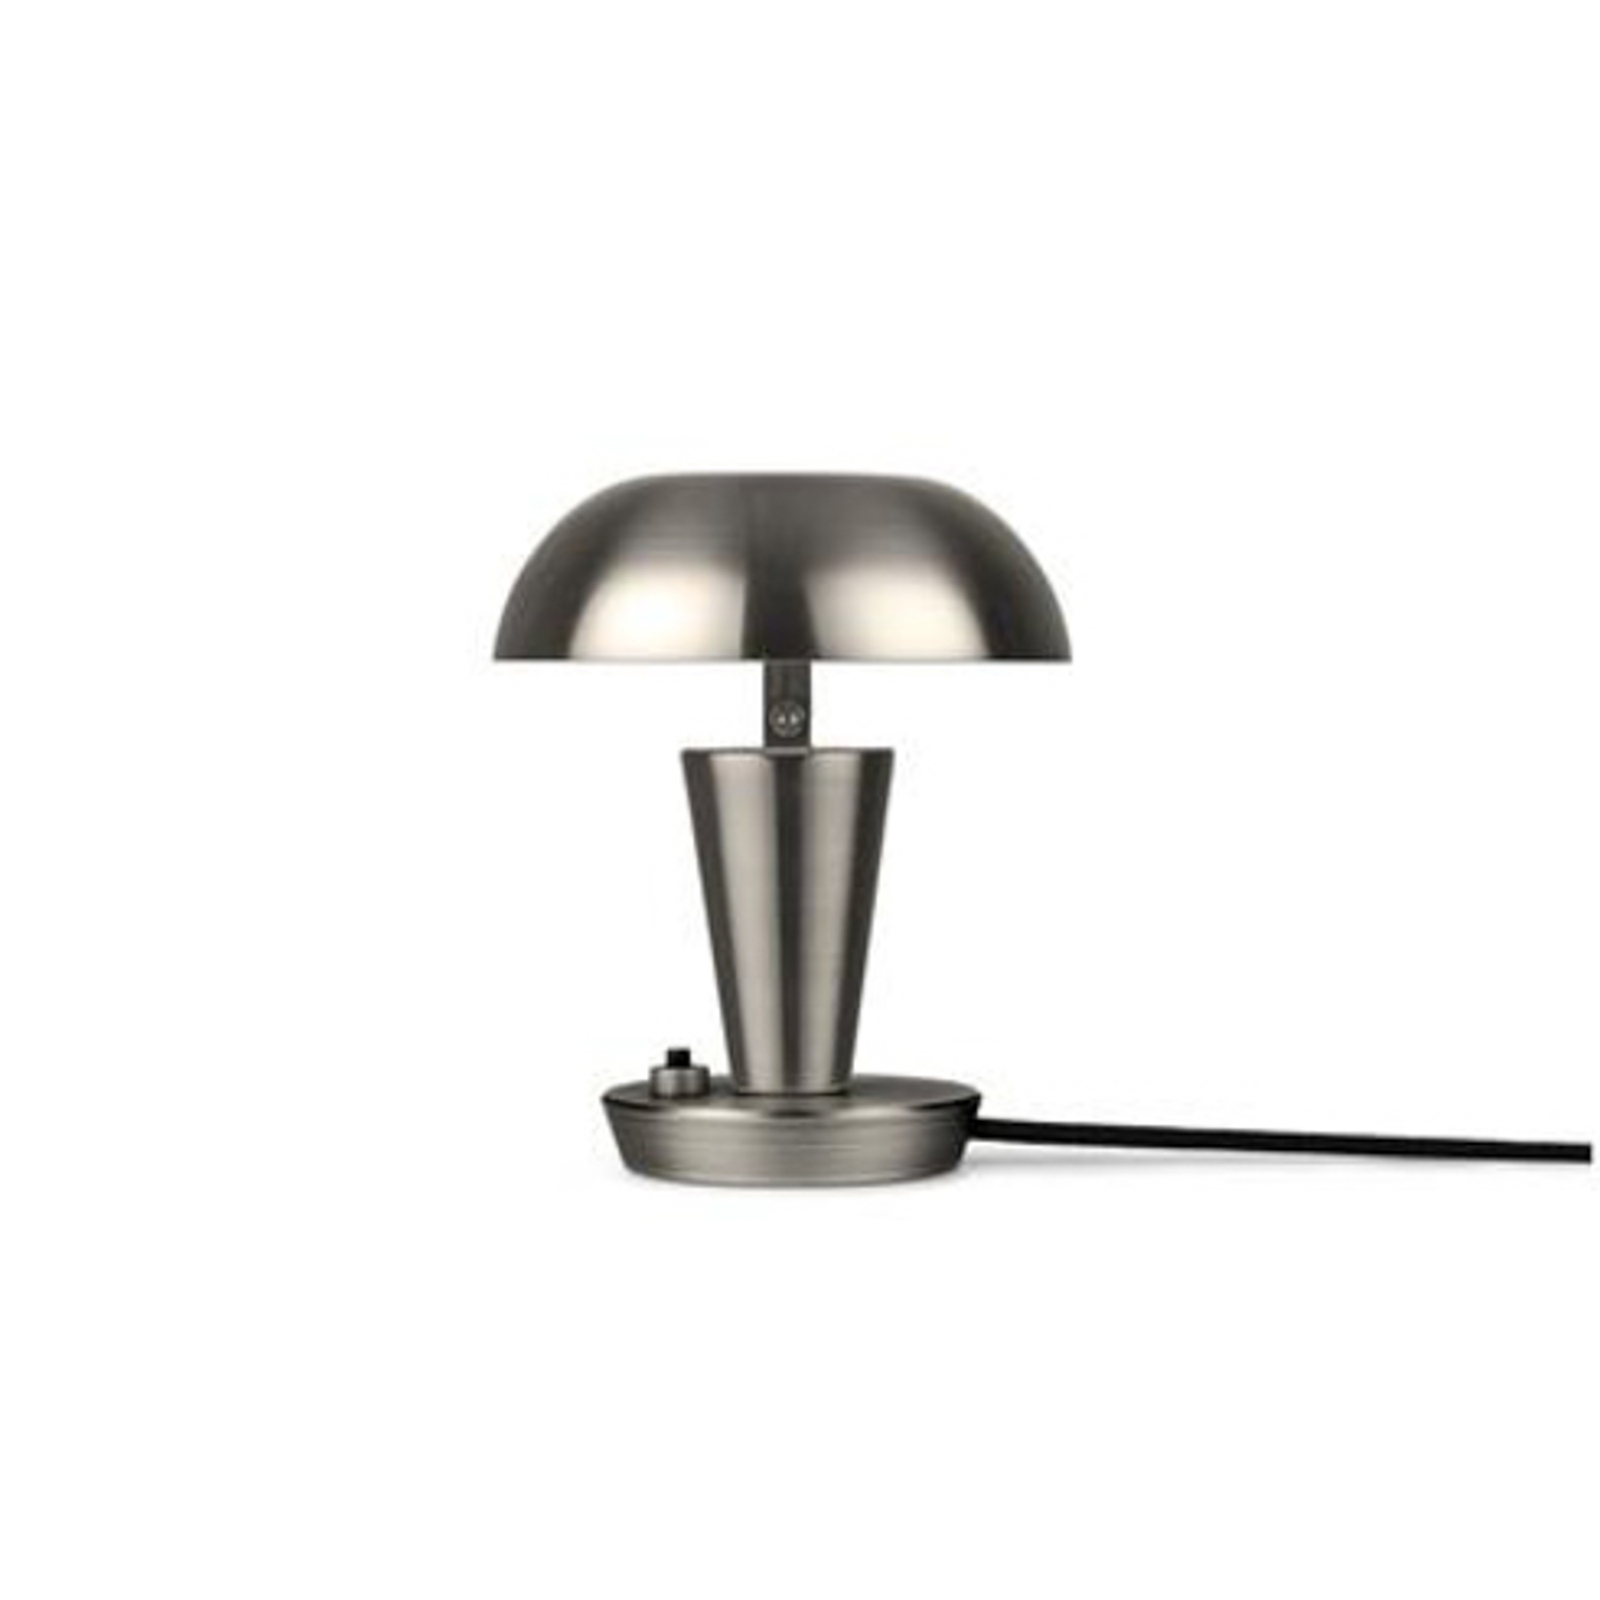 ferm LIVING Lampe à poser Tiny, nickel, 14 cm, fer, inclinable